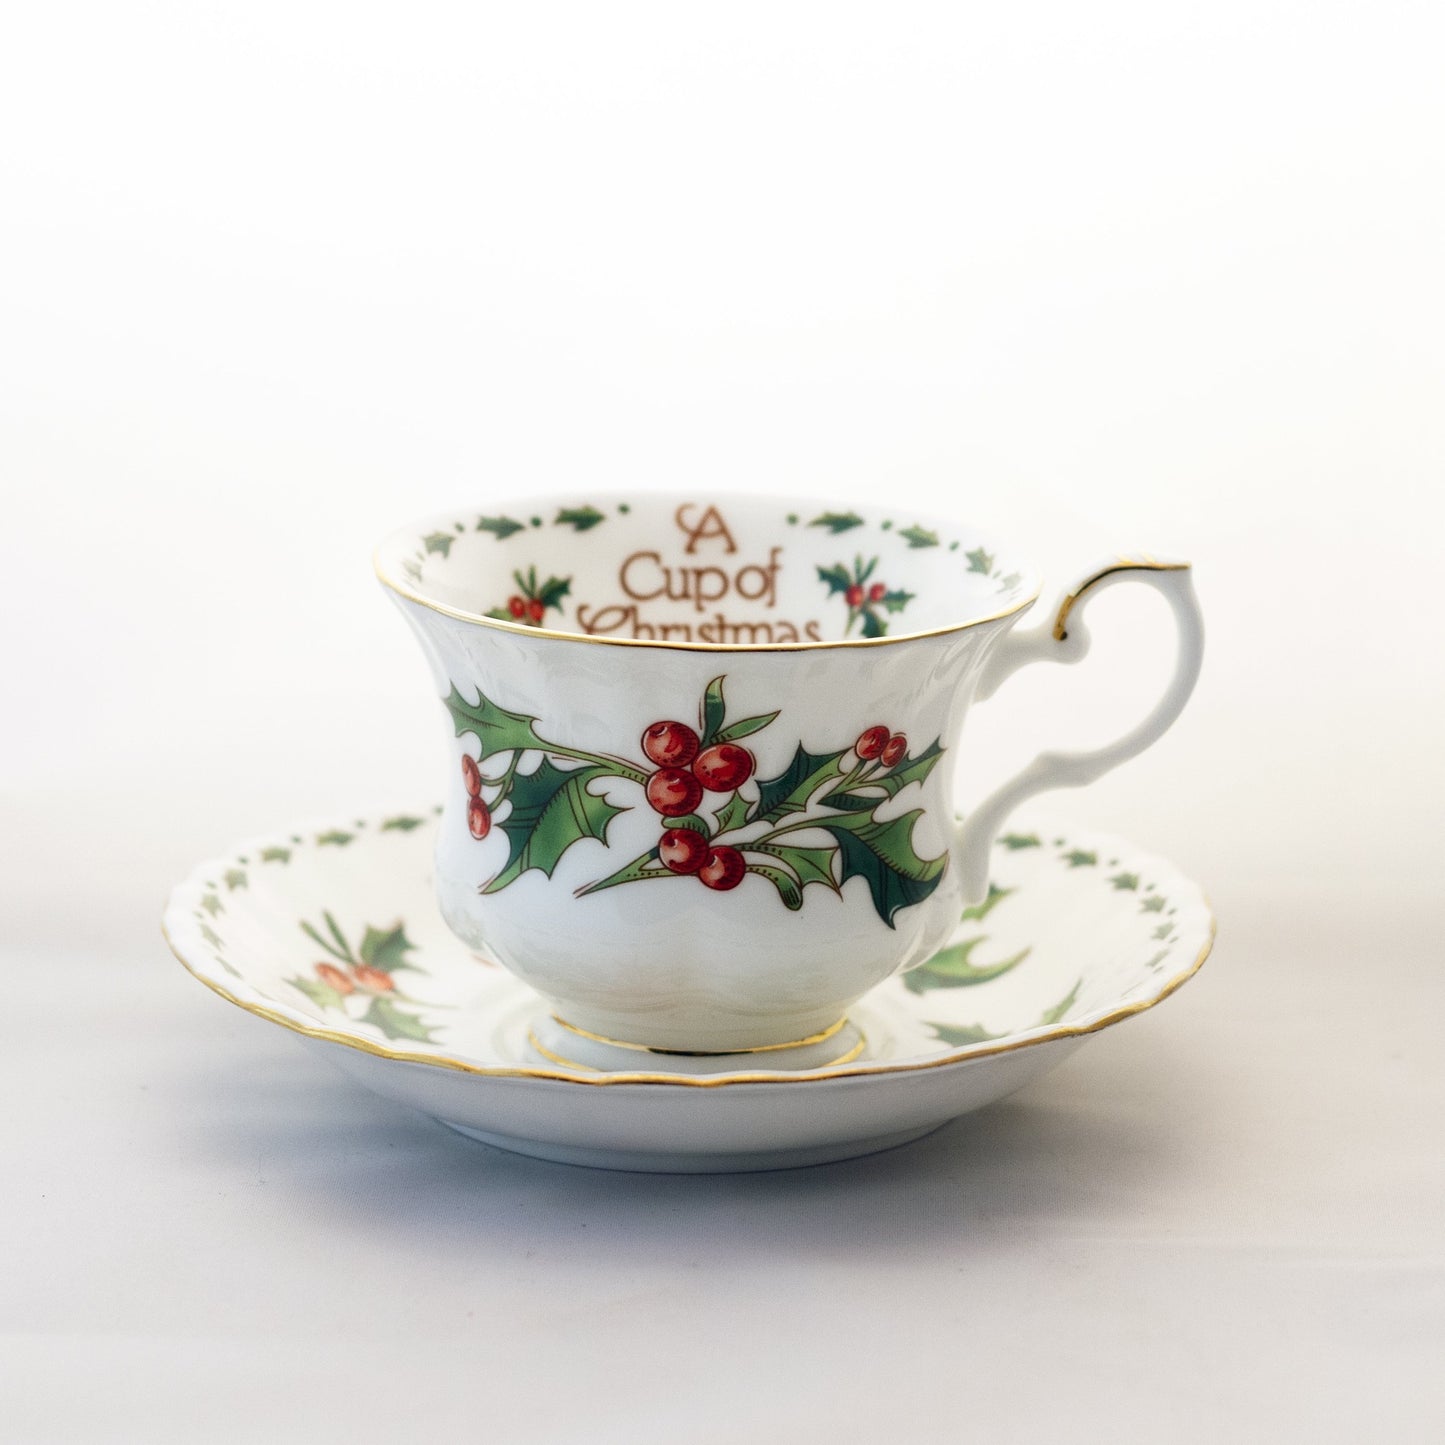 Waldman House “A CUP OF CHRISTMAS TEA” Footed Teacup and Saucer with Matching Ornament Size Tom Hegg Book Circa 1992